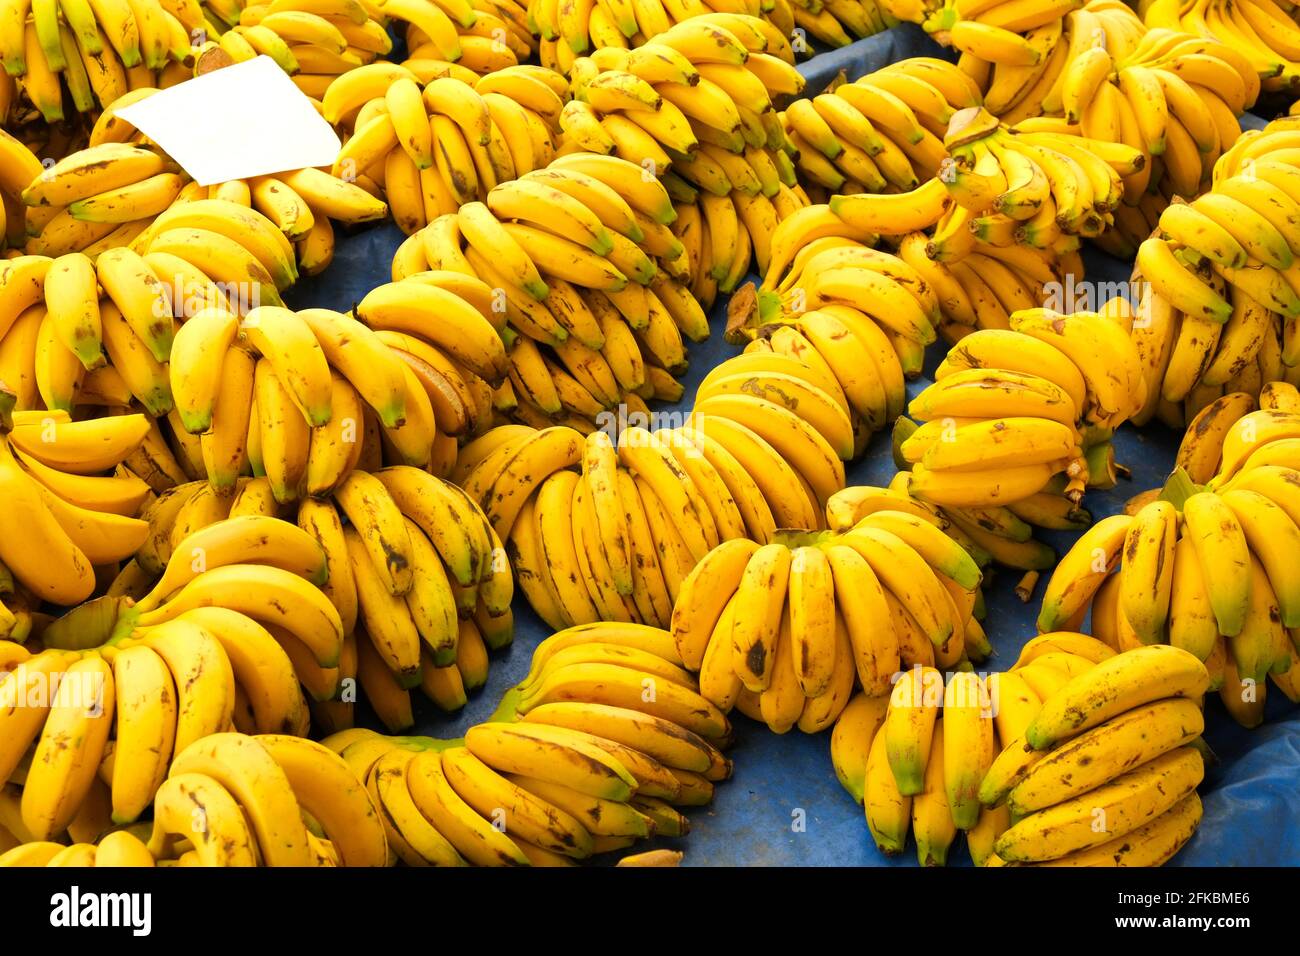 https://c8.alamy.com/comp/2FKBME6/clean-eating-concept-bunch-of-ripe-yellow-organic-cavendich-banana-hands-w-blank-price-tag-at-local-farmers-market-supermarket-display-healthy-nutr-2FKBME6.jpg